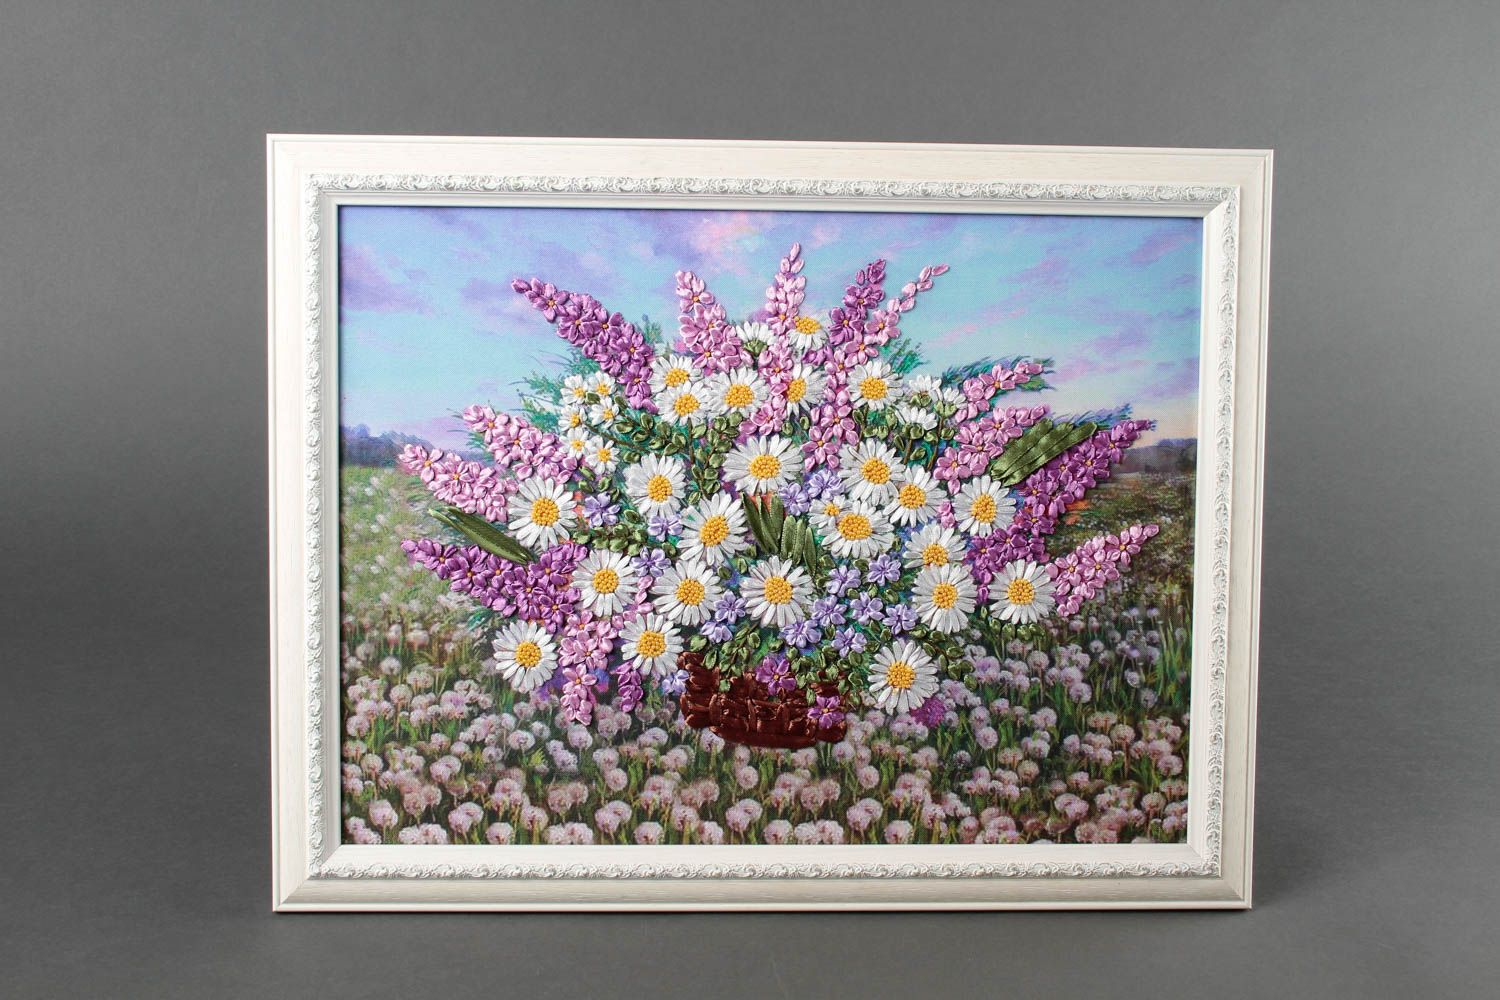 Handmade embroidered picture decoration for interior decorative wall panel photo 2